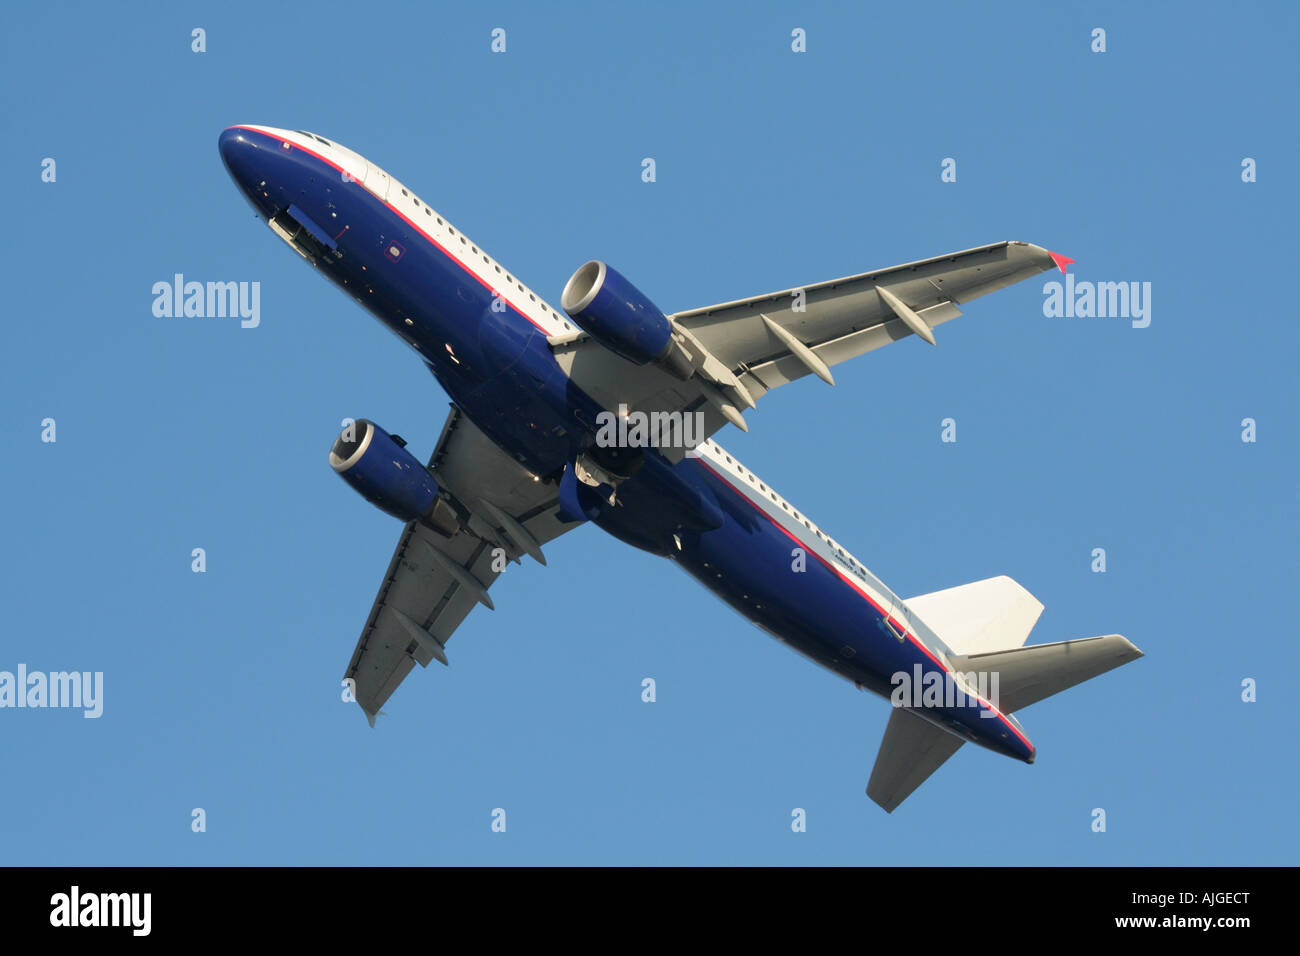 Air travel and commercial aviation. Airbus A320 passenger jet plane climbing in flight against a blue sky. No proprietary markings. Underside view. Stock Photo